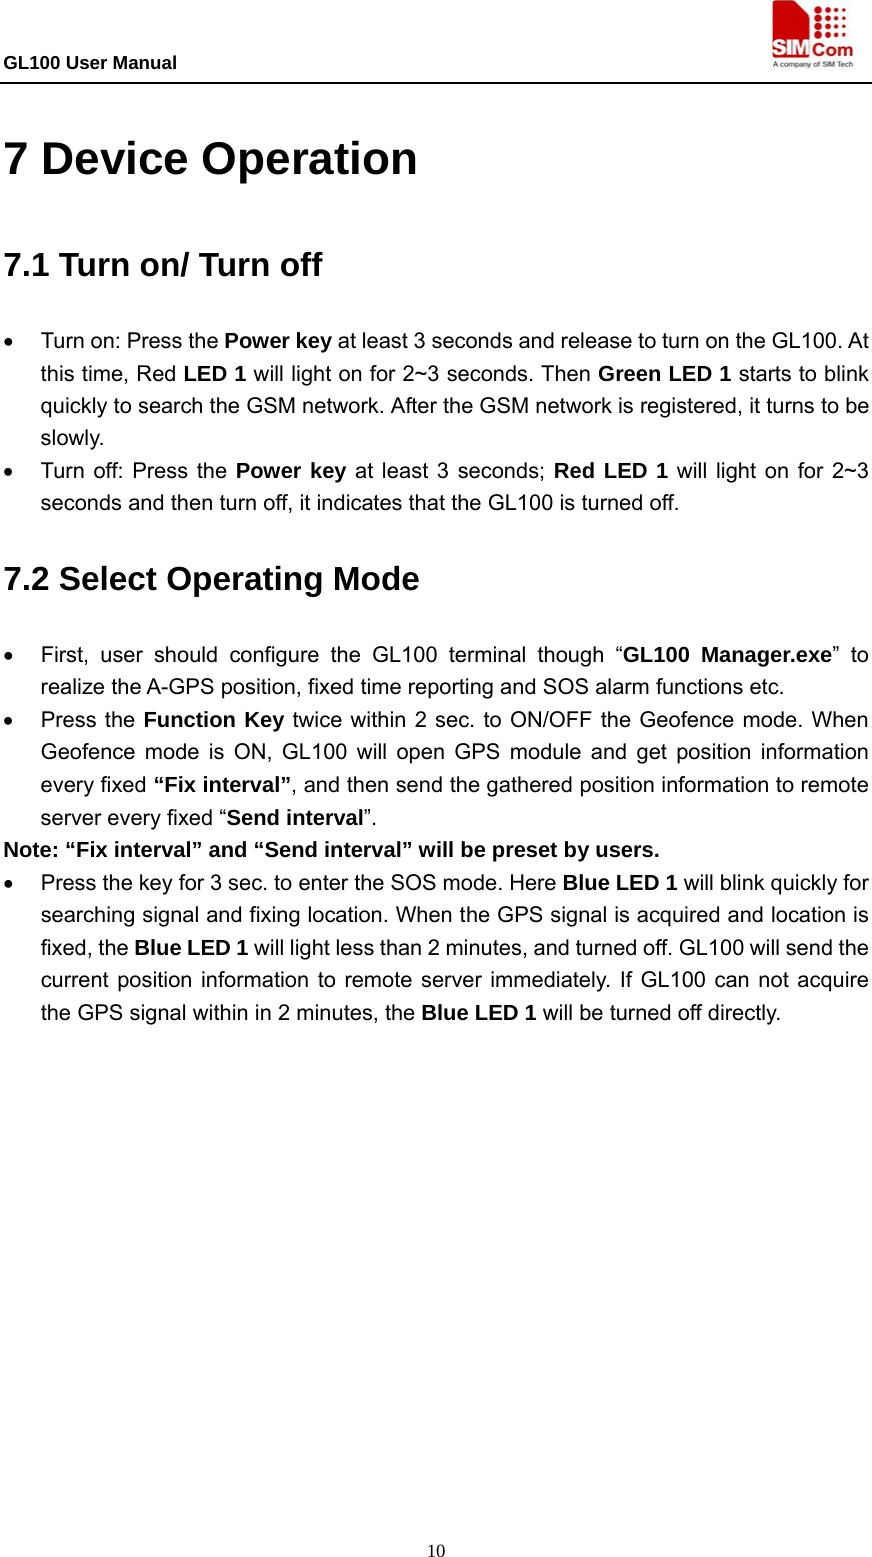 GL100 User Manual                                                                             10 7 Device Operation 7.1 Turn on/ Turn off •  Turn on: Press the Power key at least 3 seconds and release to turn on the GL100. At this time, Red LED 1 will light on for 2~3 seconds. Then Green LED 1 starts to blink quickly to search the GSM network. After the GSM network is registered, it turns to be slowly.  •  Turn off: Press the Power key at least 3 seconds; Red LED 1 will light on for 2~3 seconds and then turn off, it indicates that the GL100 is turned off.   7.2 Select Operating Mode •  First, user should configure the GL100 terminal though “GL100 Manager.exe” to realize the A-GPS position, fixed time reporting and SOS alarm functions etc. • Press the Function Key twice within 2 sec. to ON/OFF the Geofence mode. When Geofence mode is ON, GL100 will open GPS module and get position information every fixed “Fix interval”, and then send the gathered position information to remote server every fixed “Send interval”. Note: “Fix interval” and “Send interval” will be preset by users. •  Press the key for 3 sec. to enter the SOS mode. Here Blue LED 1 will blink quickly for searching signal and fixing location. When the GPS signal is acquired and location is fixed, the Blue LED 1 will light less than 2 minutes, and turned off. GL100 will send the current position information to remote server immediately. If GL100 can not acquire the GPS signal within in 2 minutes, the Blue LED 1 will be turned off directly. 